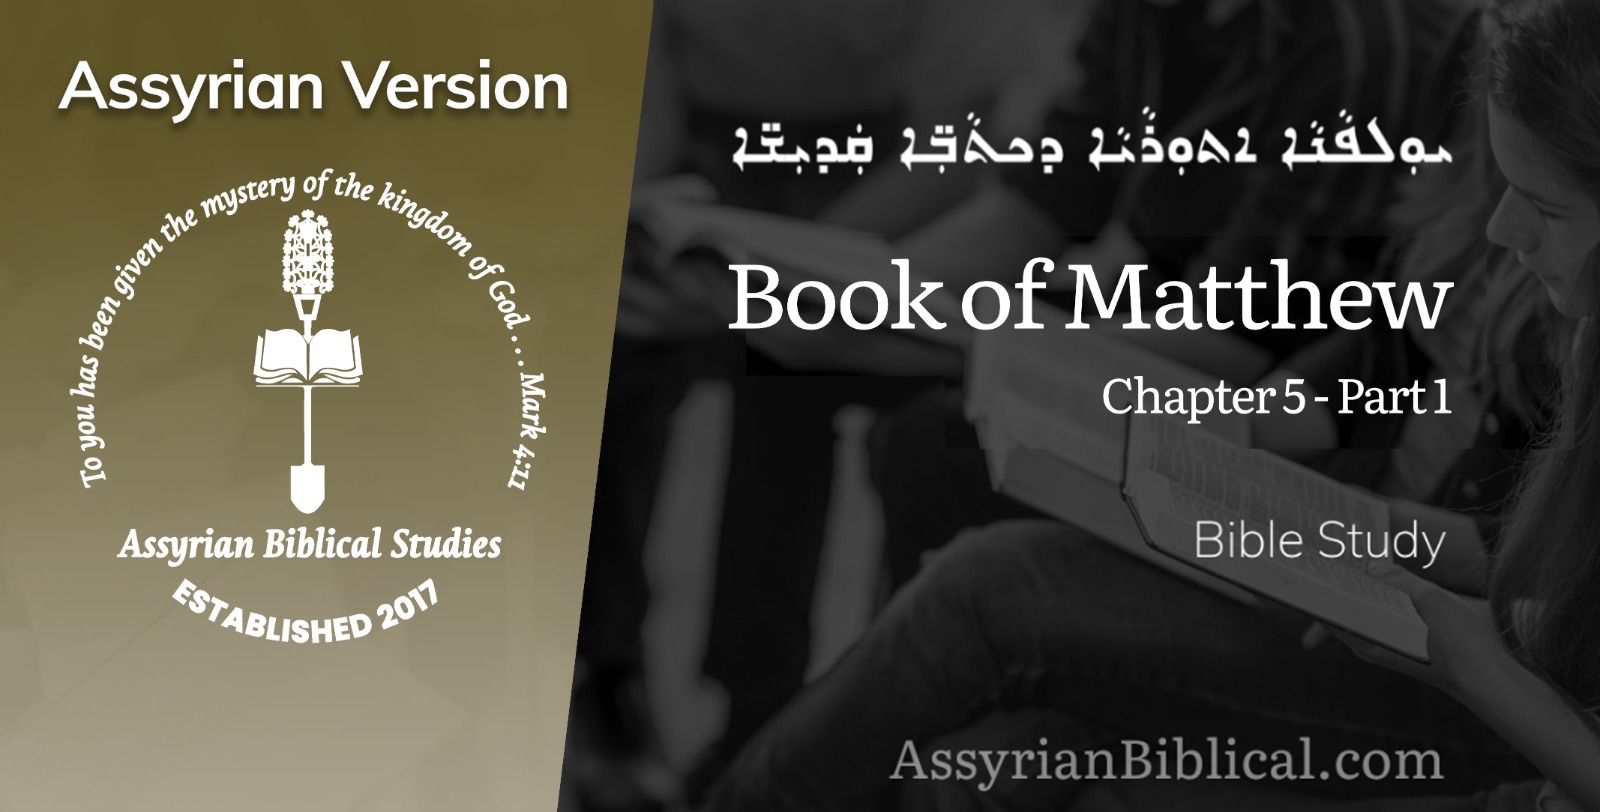 Image of video thumbnail for Book of Mathew Chapter 5 Part 1 in Assyrian